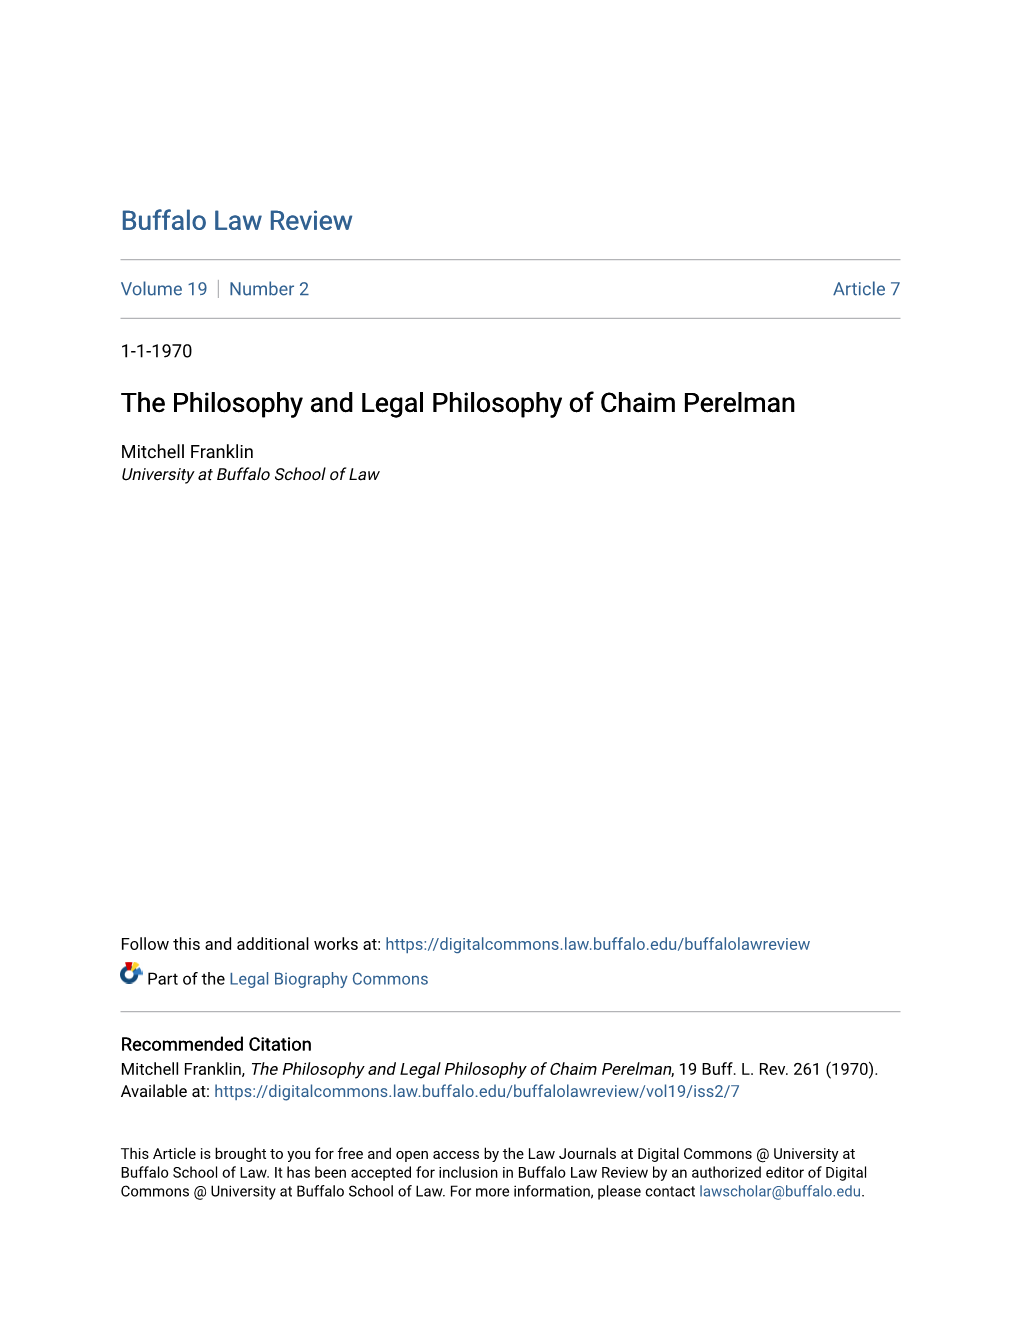 The Philosophy and Legal Philosophy of Chaim Perelman